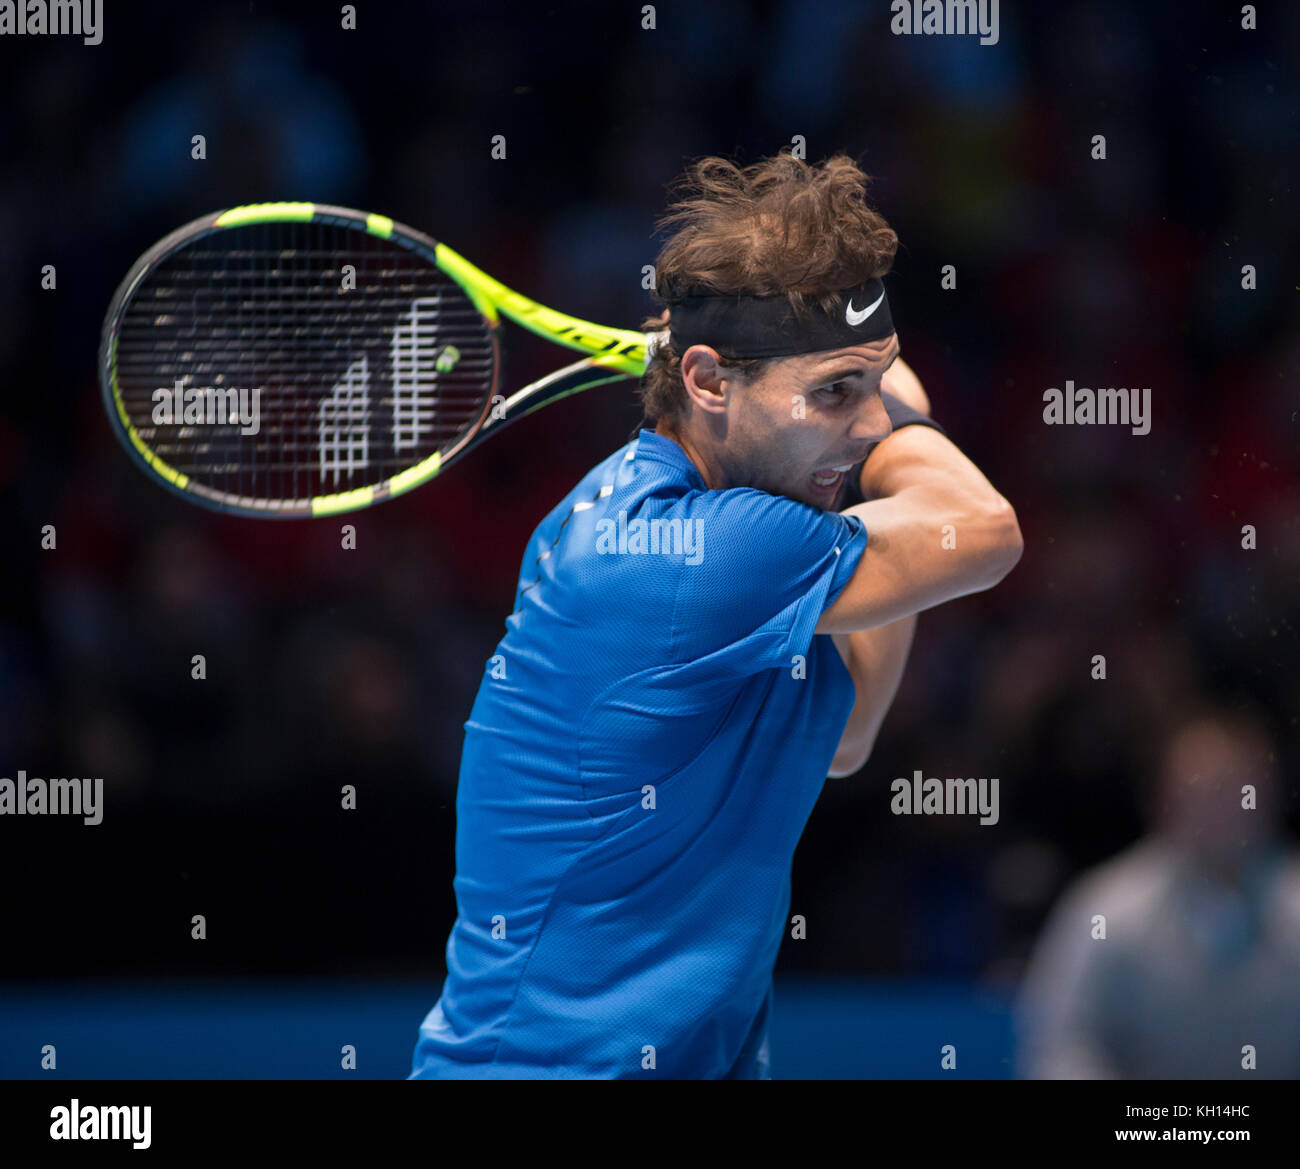 O2, London, UK. 13 November, 2017. Day 2 of the Nitto ATP Finals, evening  singles match with world number 1 seed Rafael Nadal (ESP) vs David Goffin  (BEL), Goffin winning 7-6 (7-5)